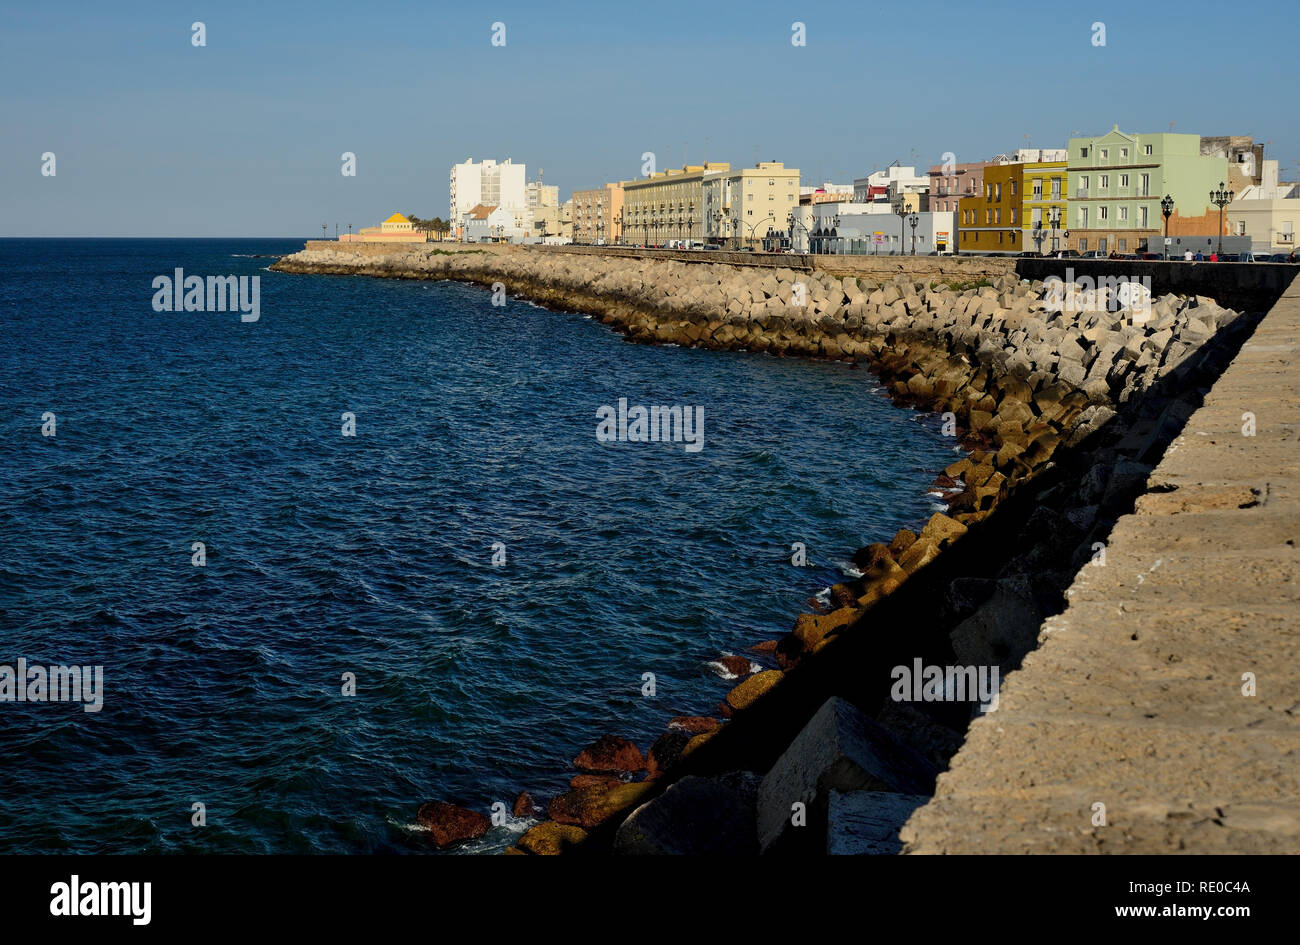 Rock armour protecting the seawall along the Campo del Sur, Cadiz. Stock Photo